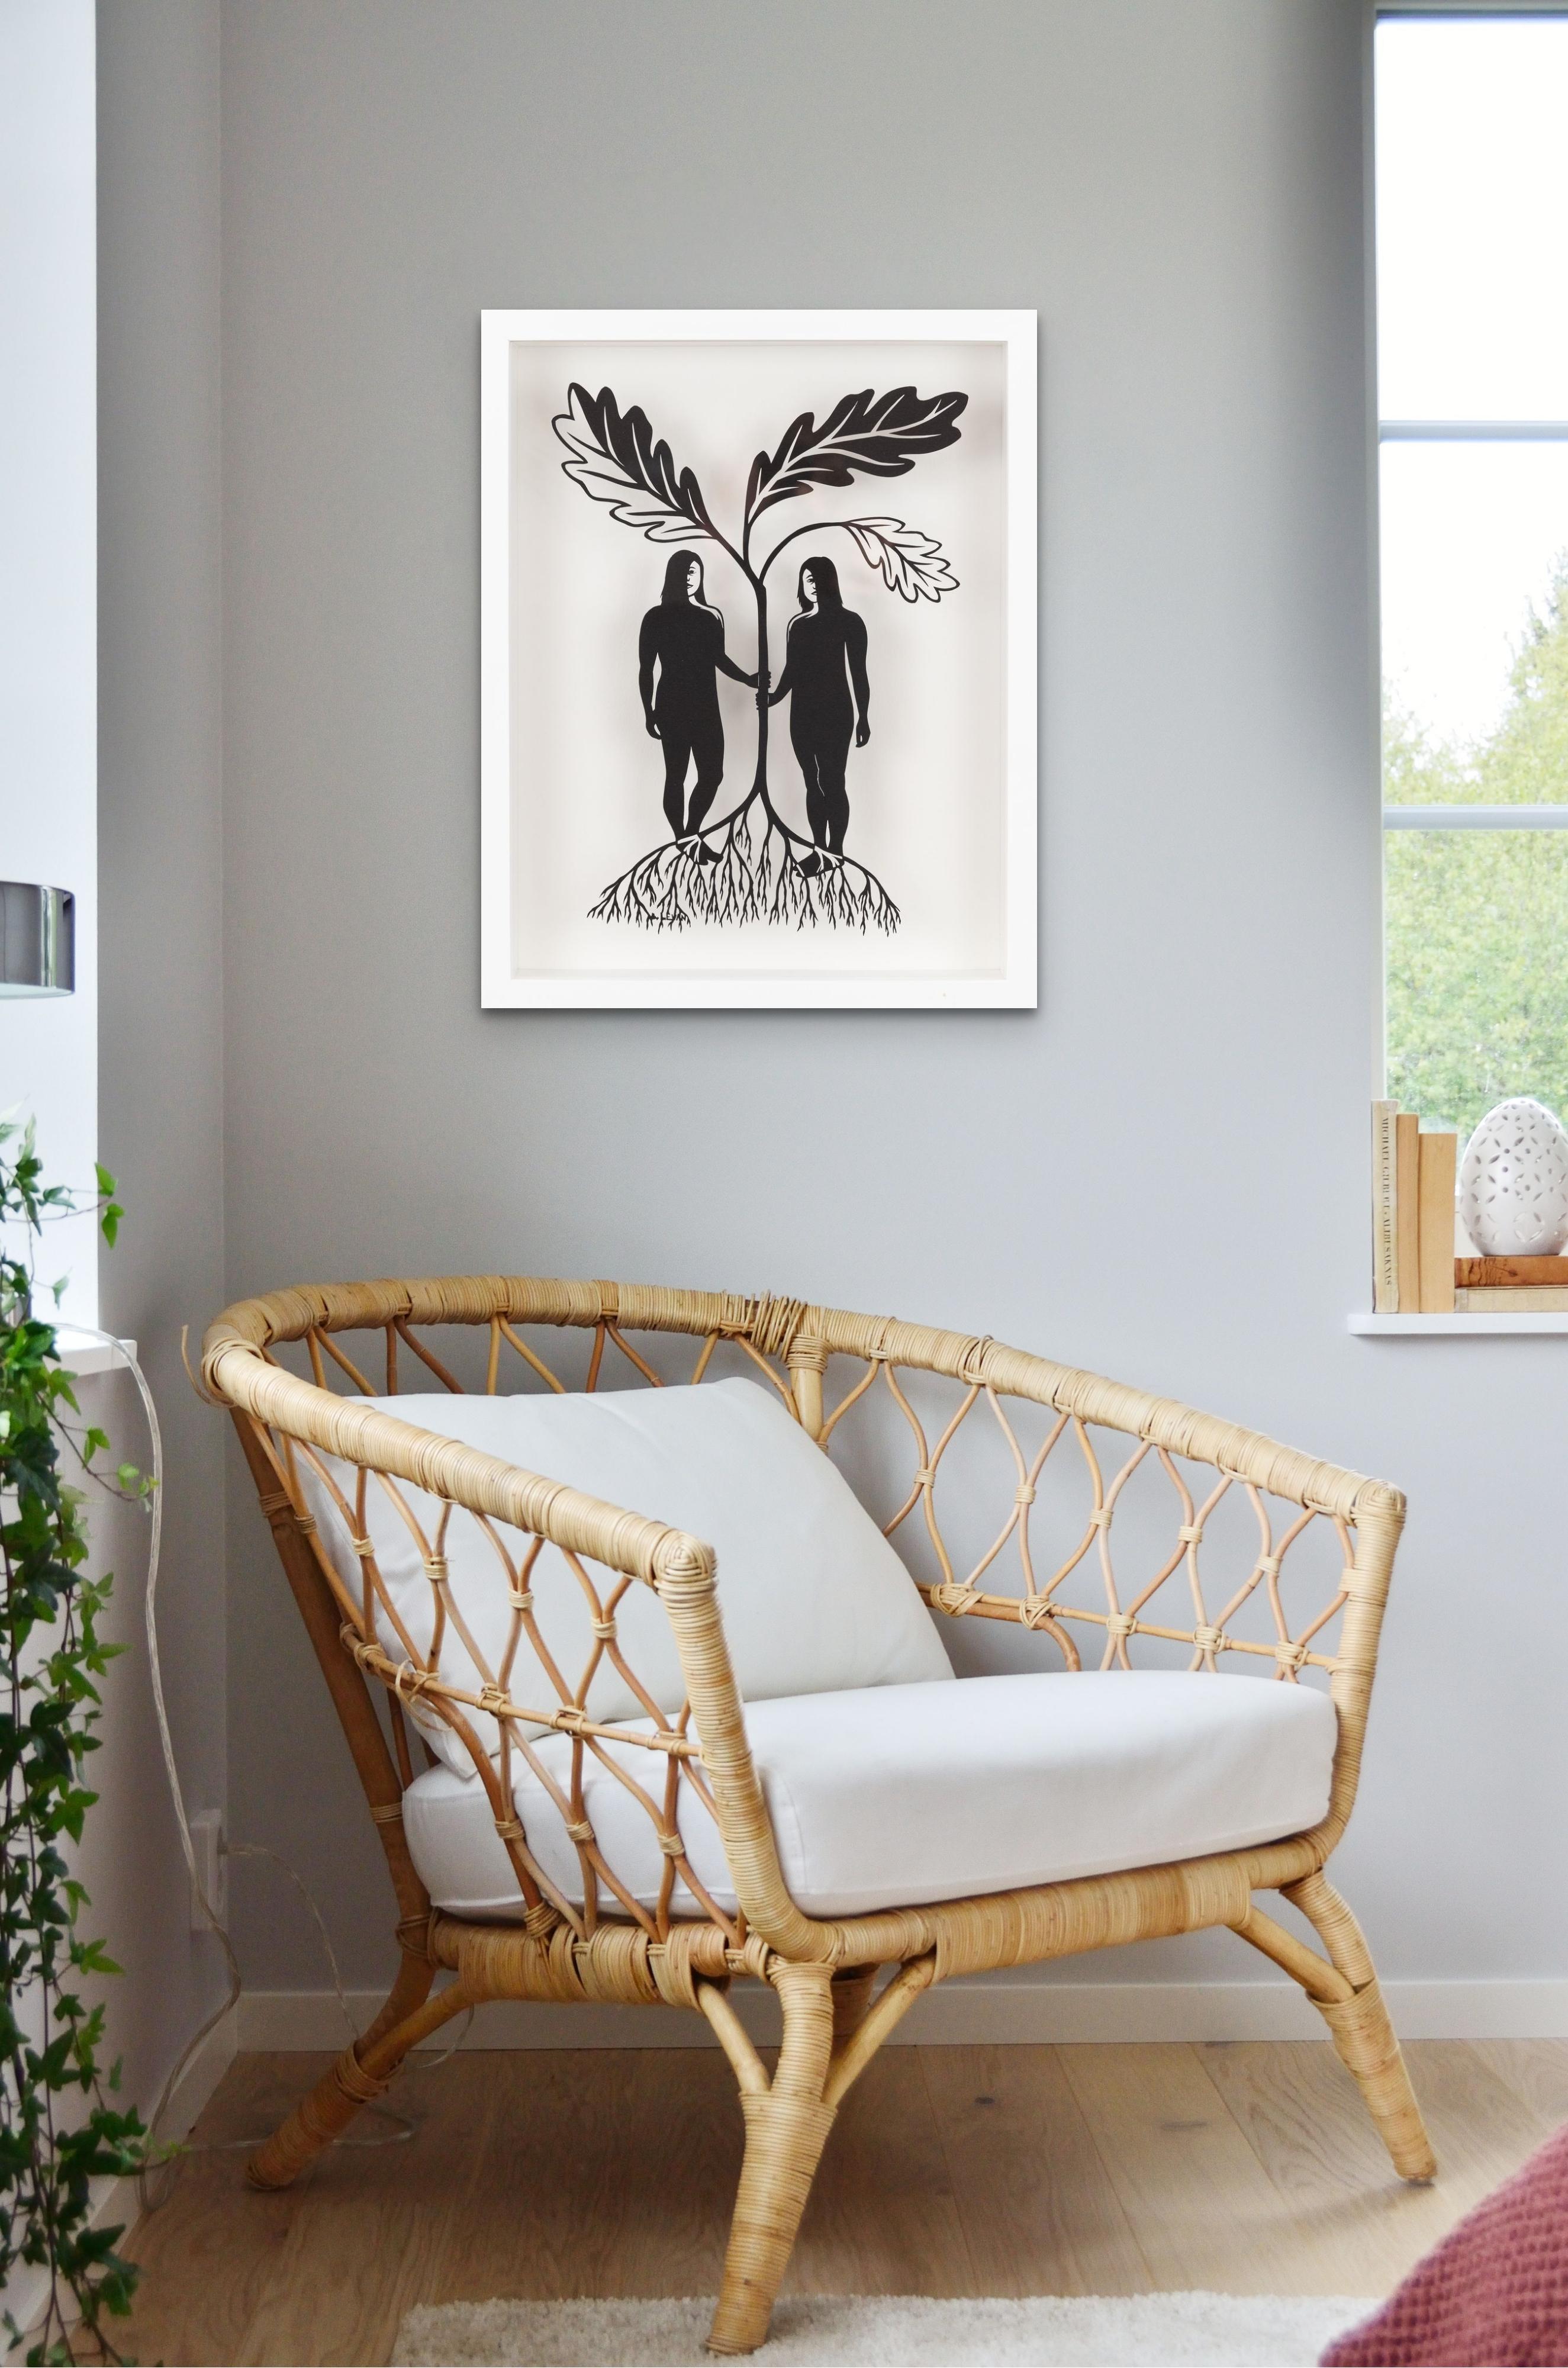 Either Or - Paper-cut Figures Holding Leaf Facing to the Right by Bianca Levan For Sale 1